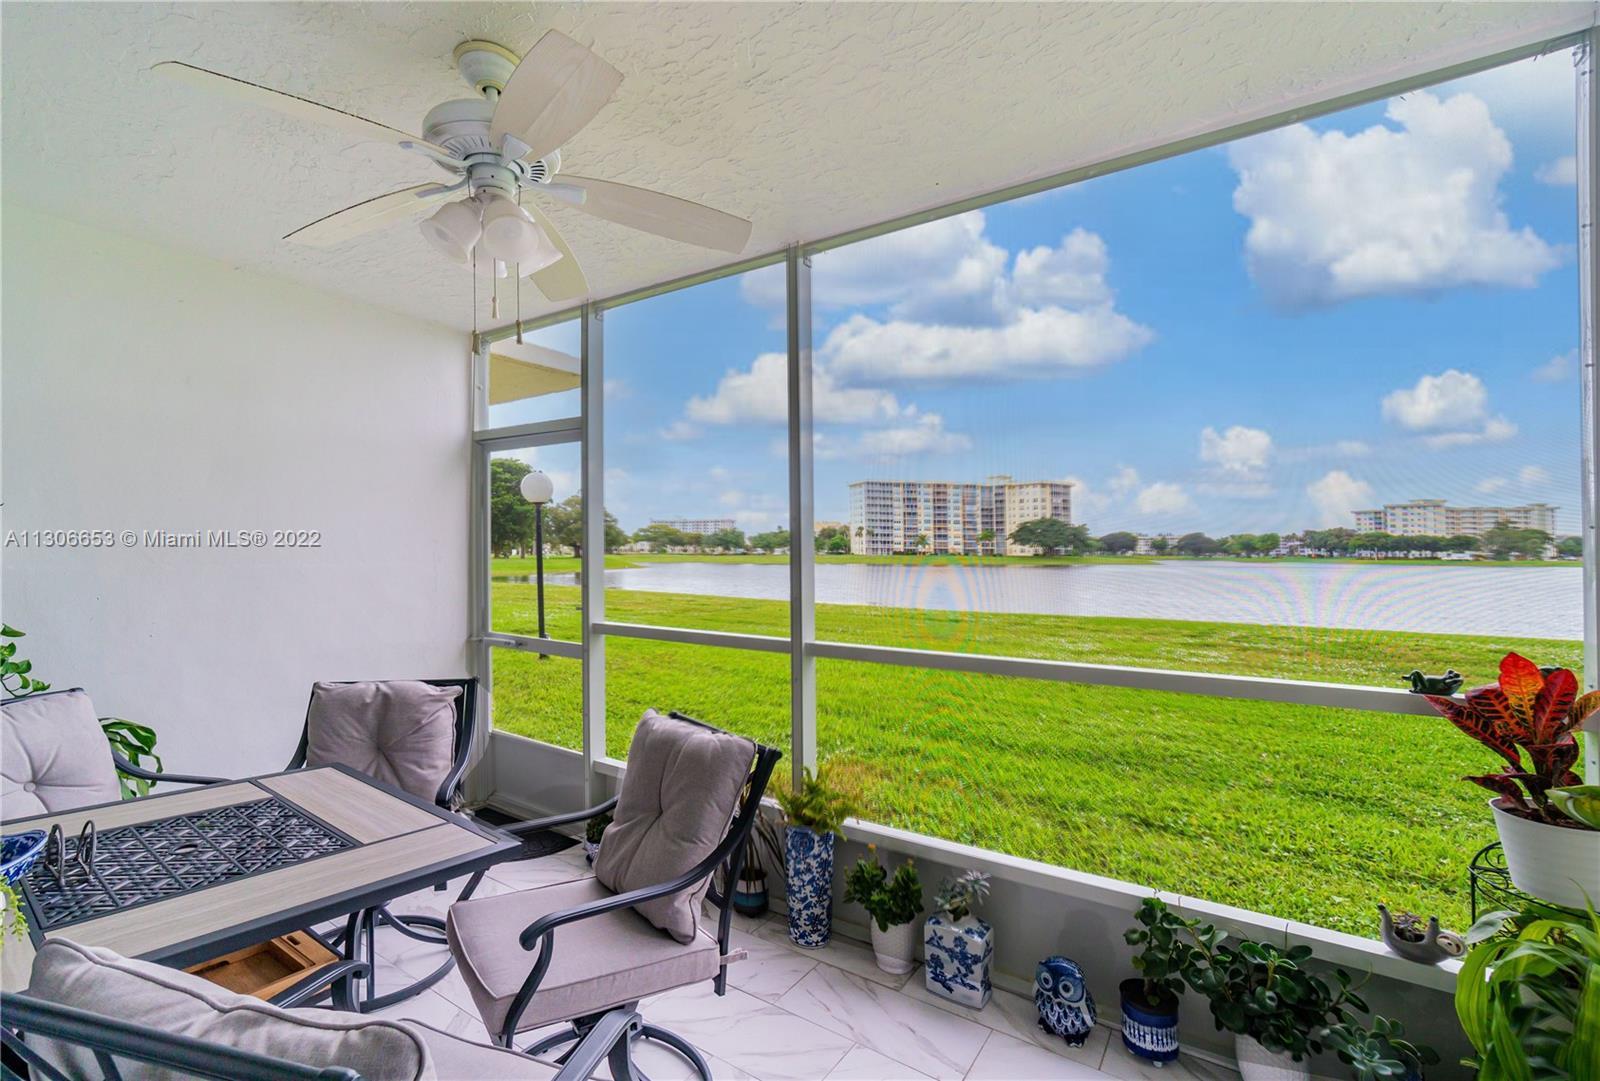 Enjoy A Beautiful Lake View From A Large Screened-In Patio In Your New Home. This First Floor Condo 